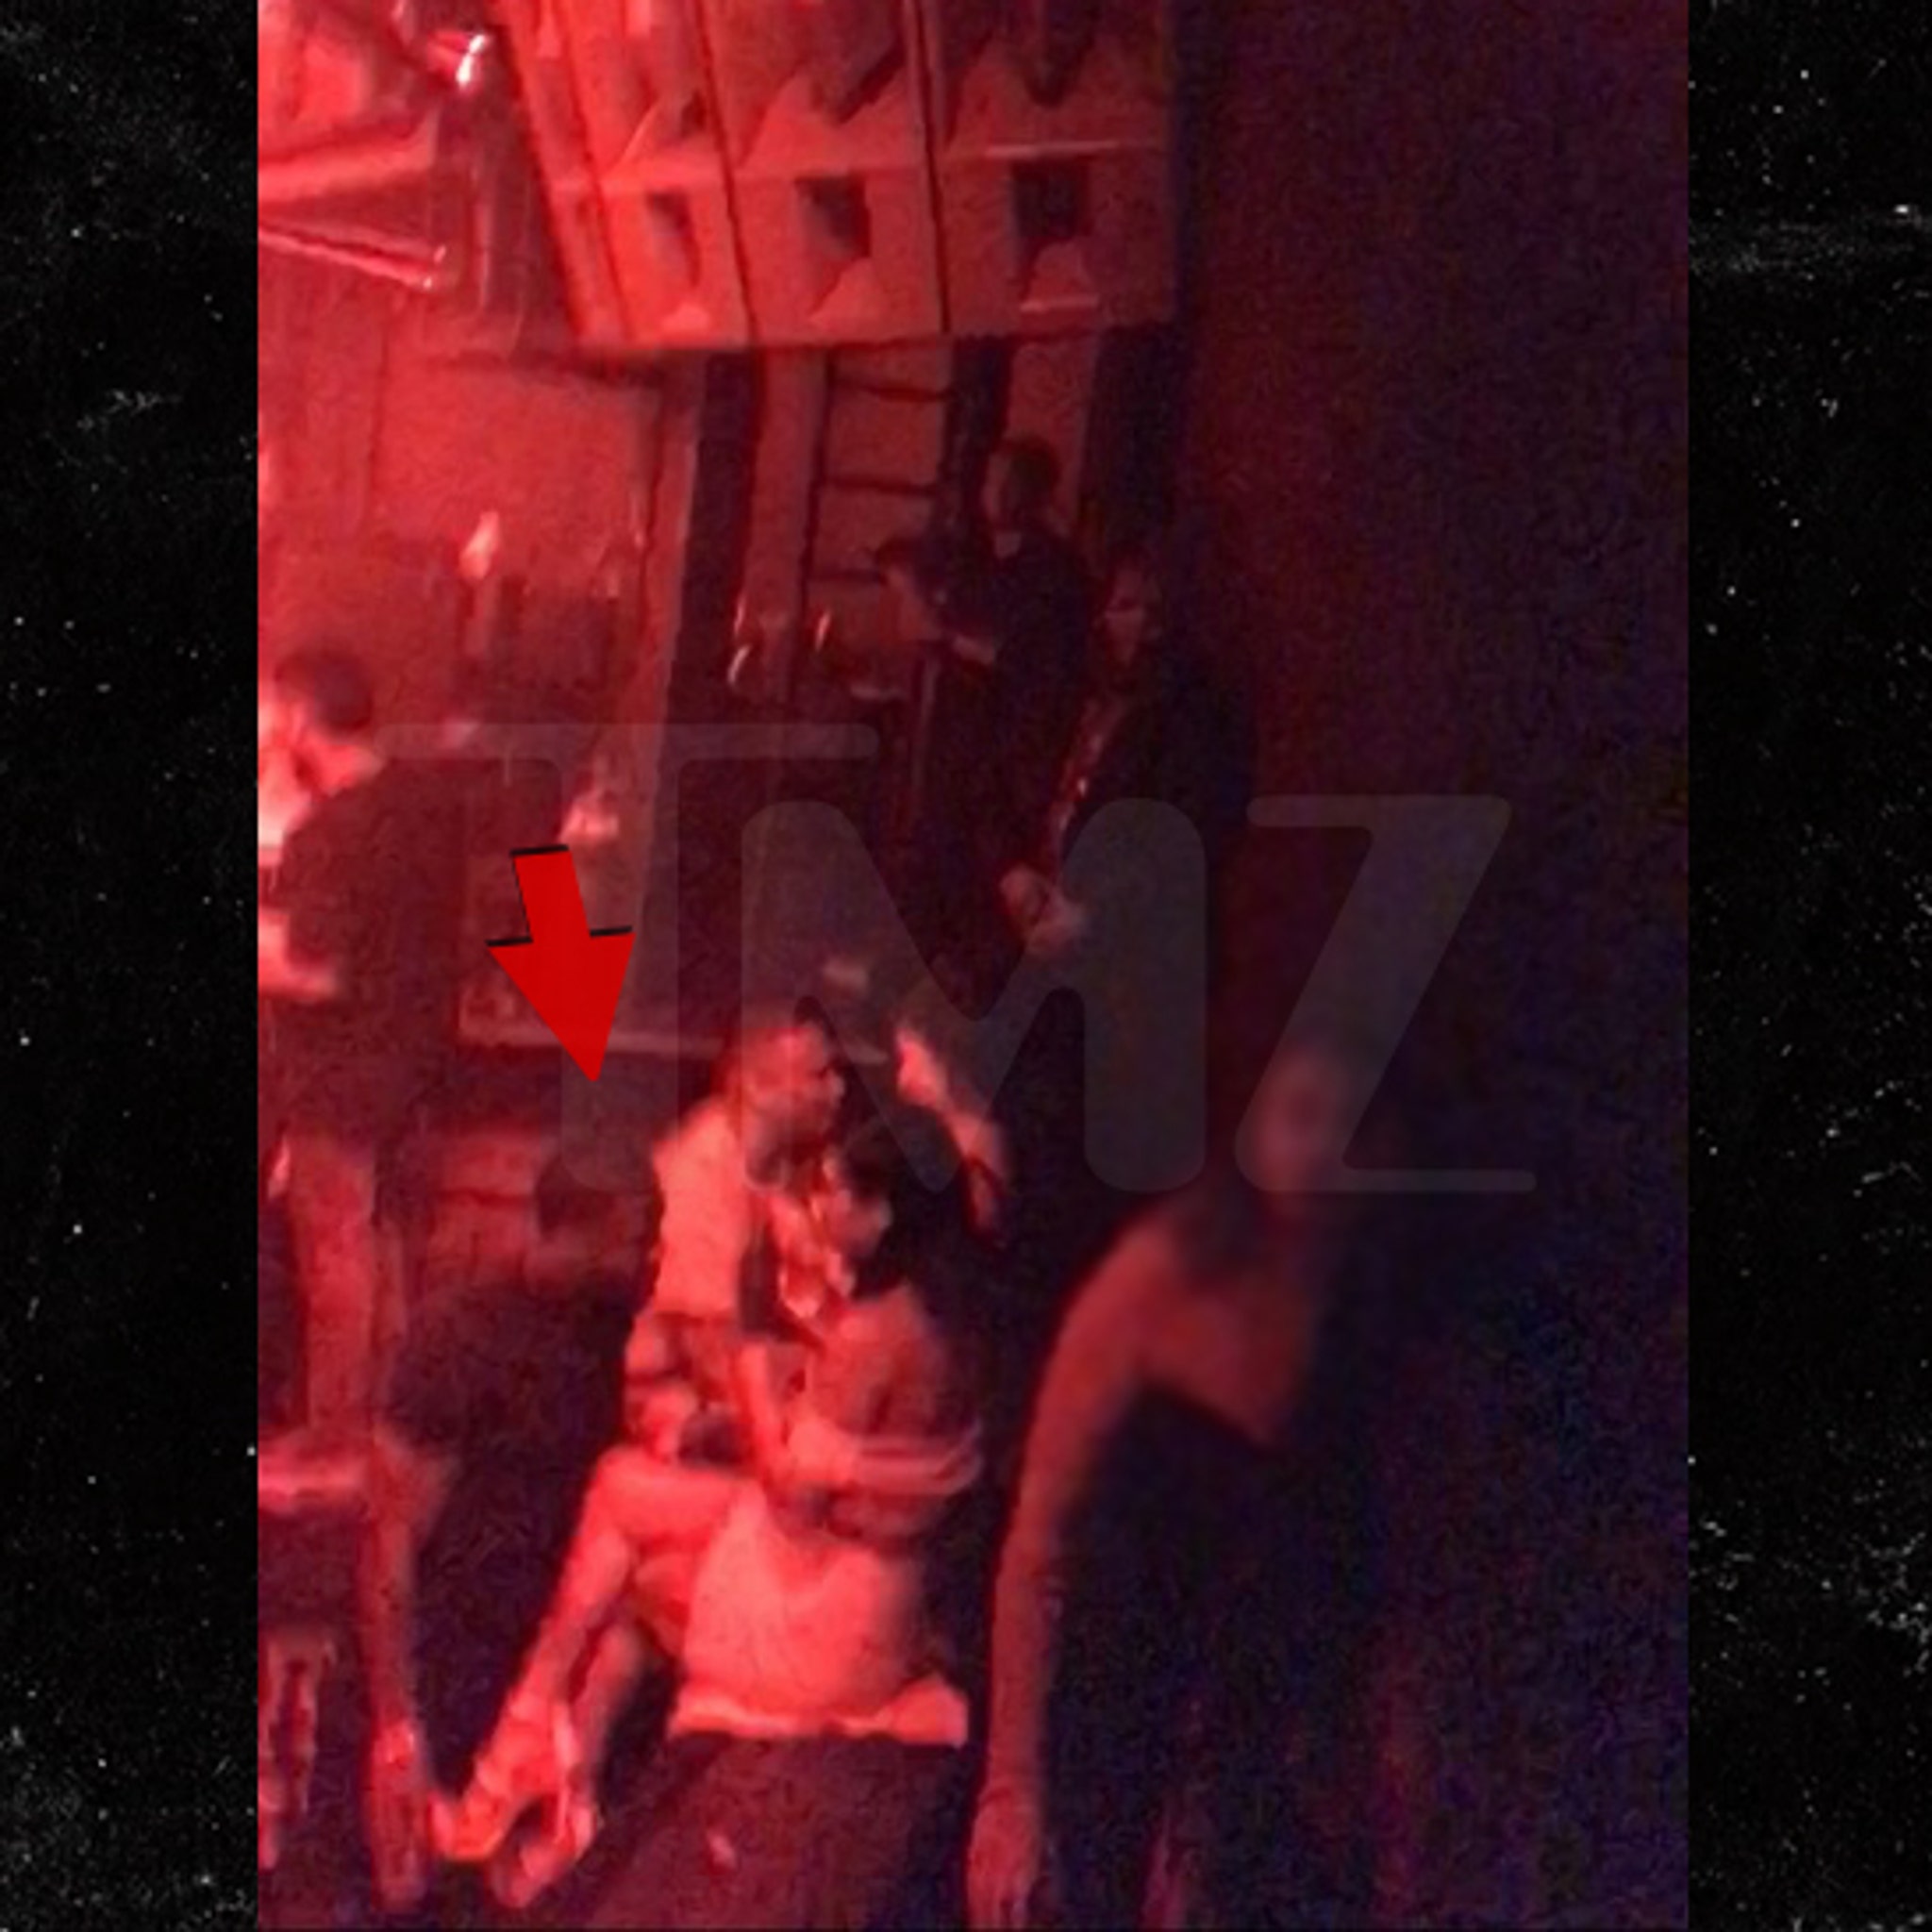 Rajwap Com Chit Wife Sex Story Video - Kevin Hart Parties with Woman in Sex Video During Wild Vegas Weekend